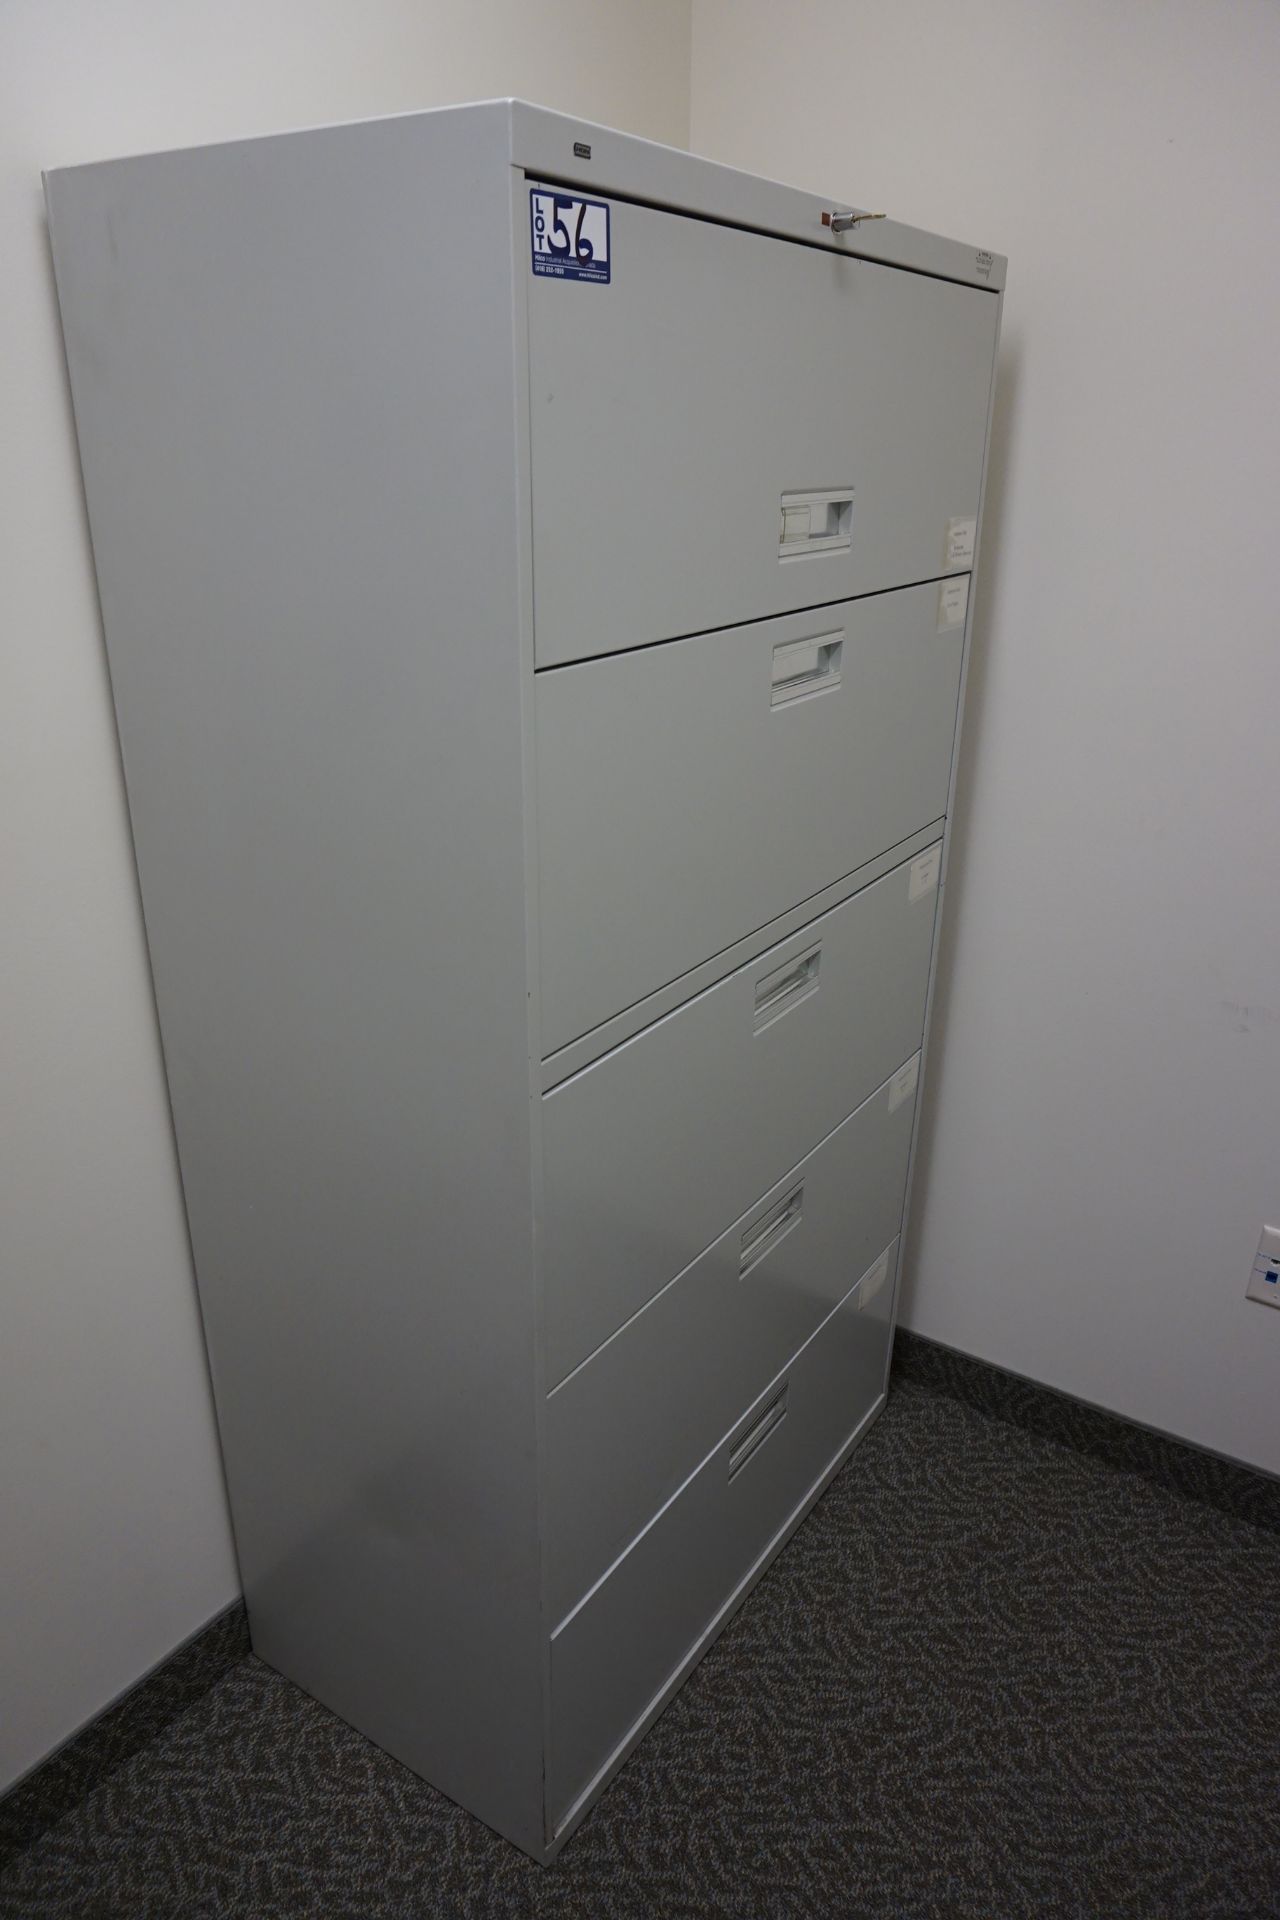 Hon 5-Drawer Lateral File Cabinets - Image 2 of 2